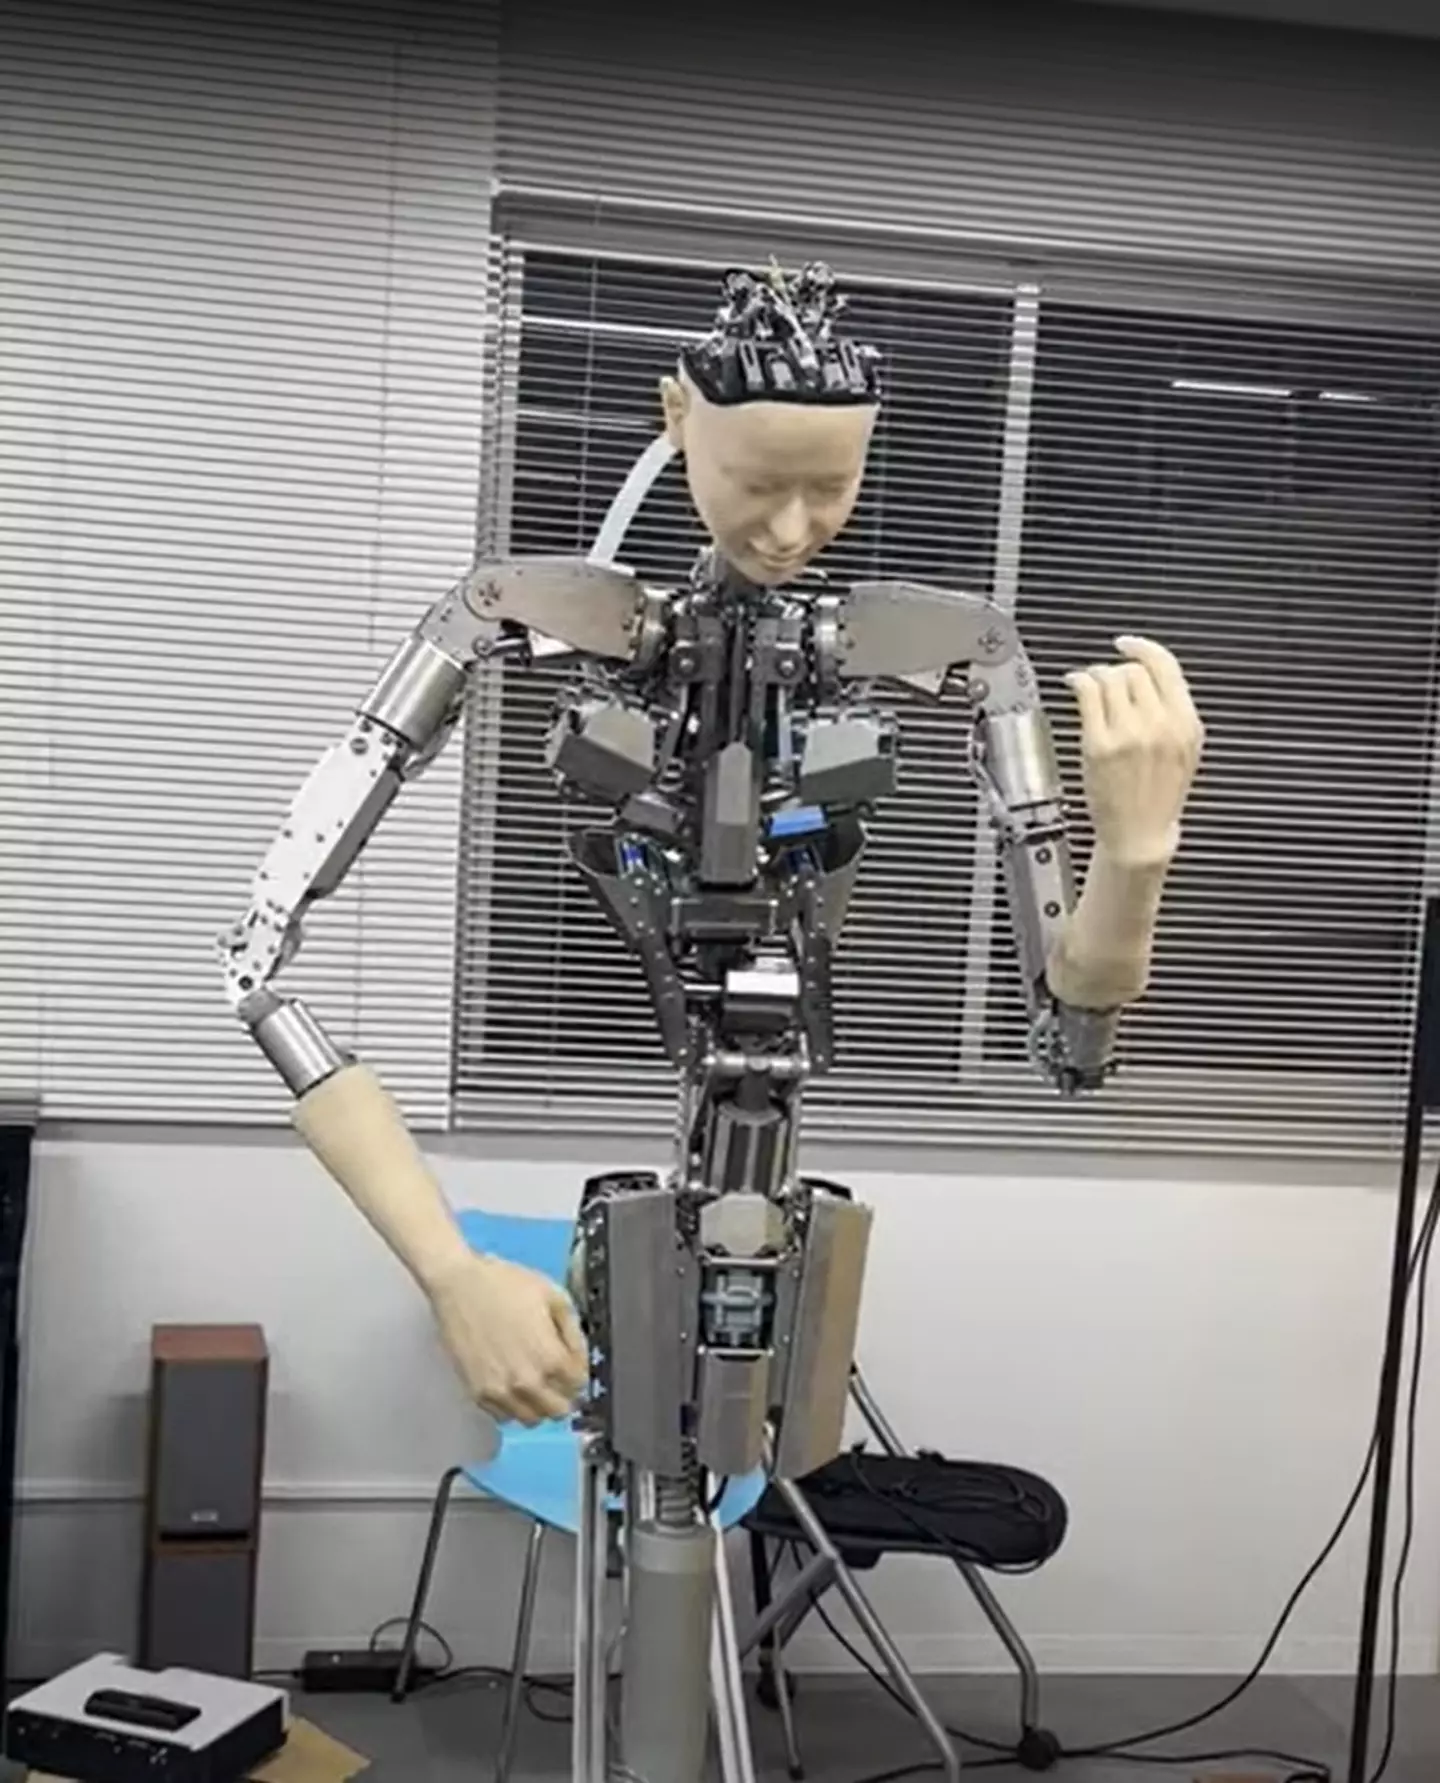 We're not sure this robot will be starting a band anytime soon.